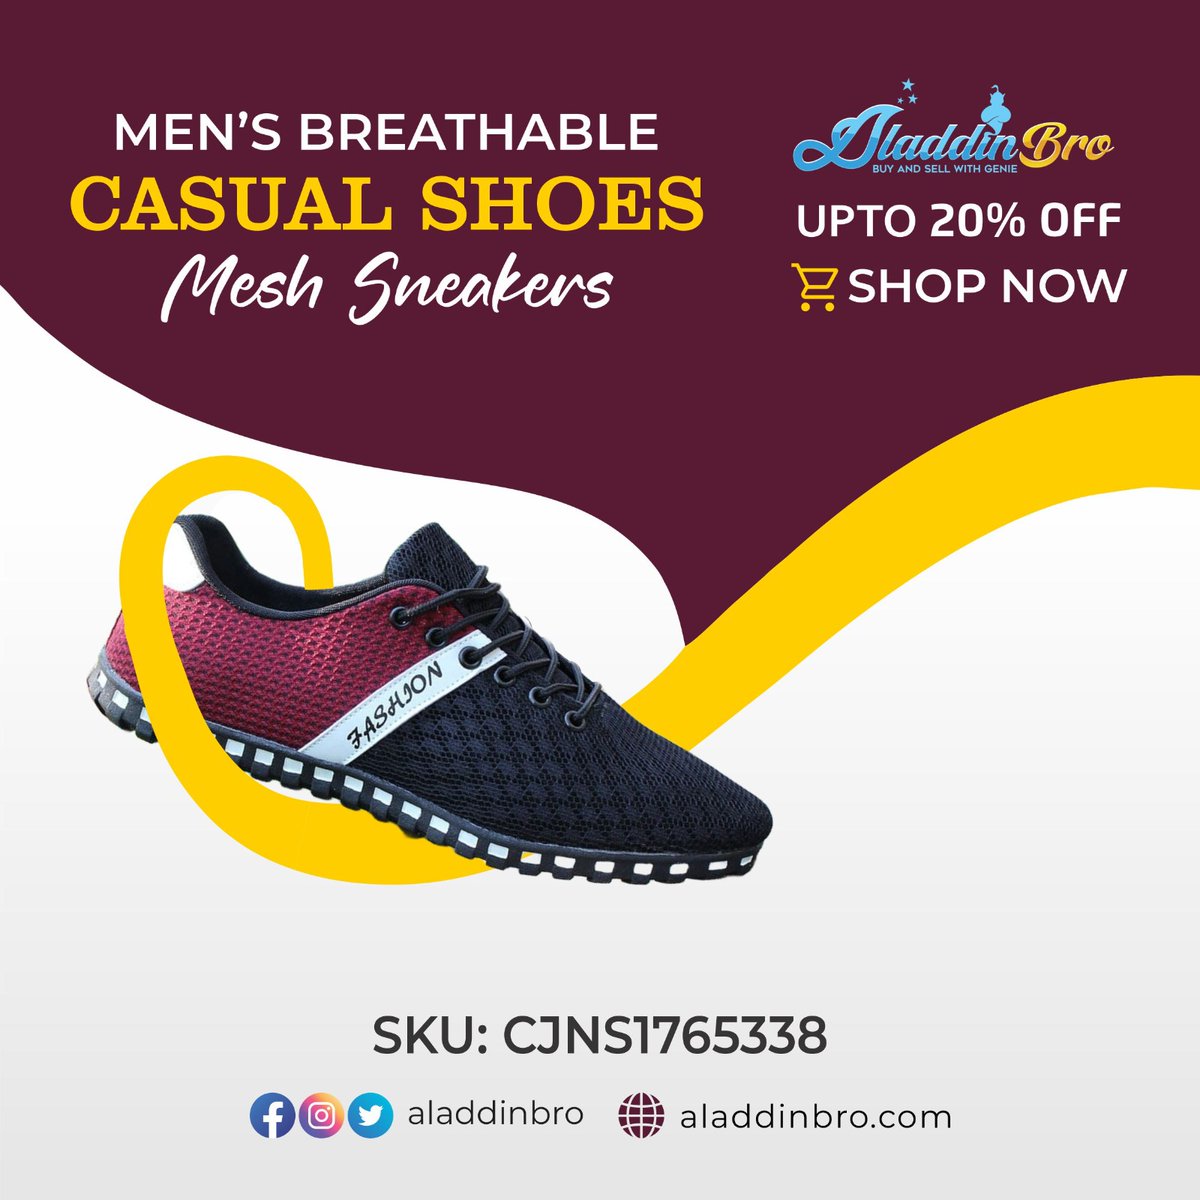 Shop Now: rb.gy/jhg24h
Aladdinbro Men's Breathable Casual Shoes
Experience comfort and style with our breathable casual shoes
Step into comfort and confidence.
Explore More: Aladdinbro.com
#AladdinbroMen #BreathableShoes #CasualComfort #StepInStyle